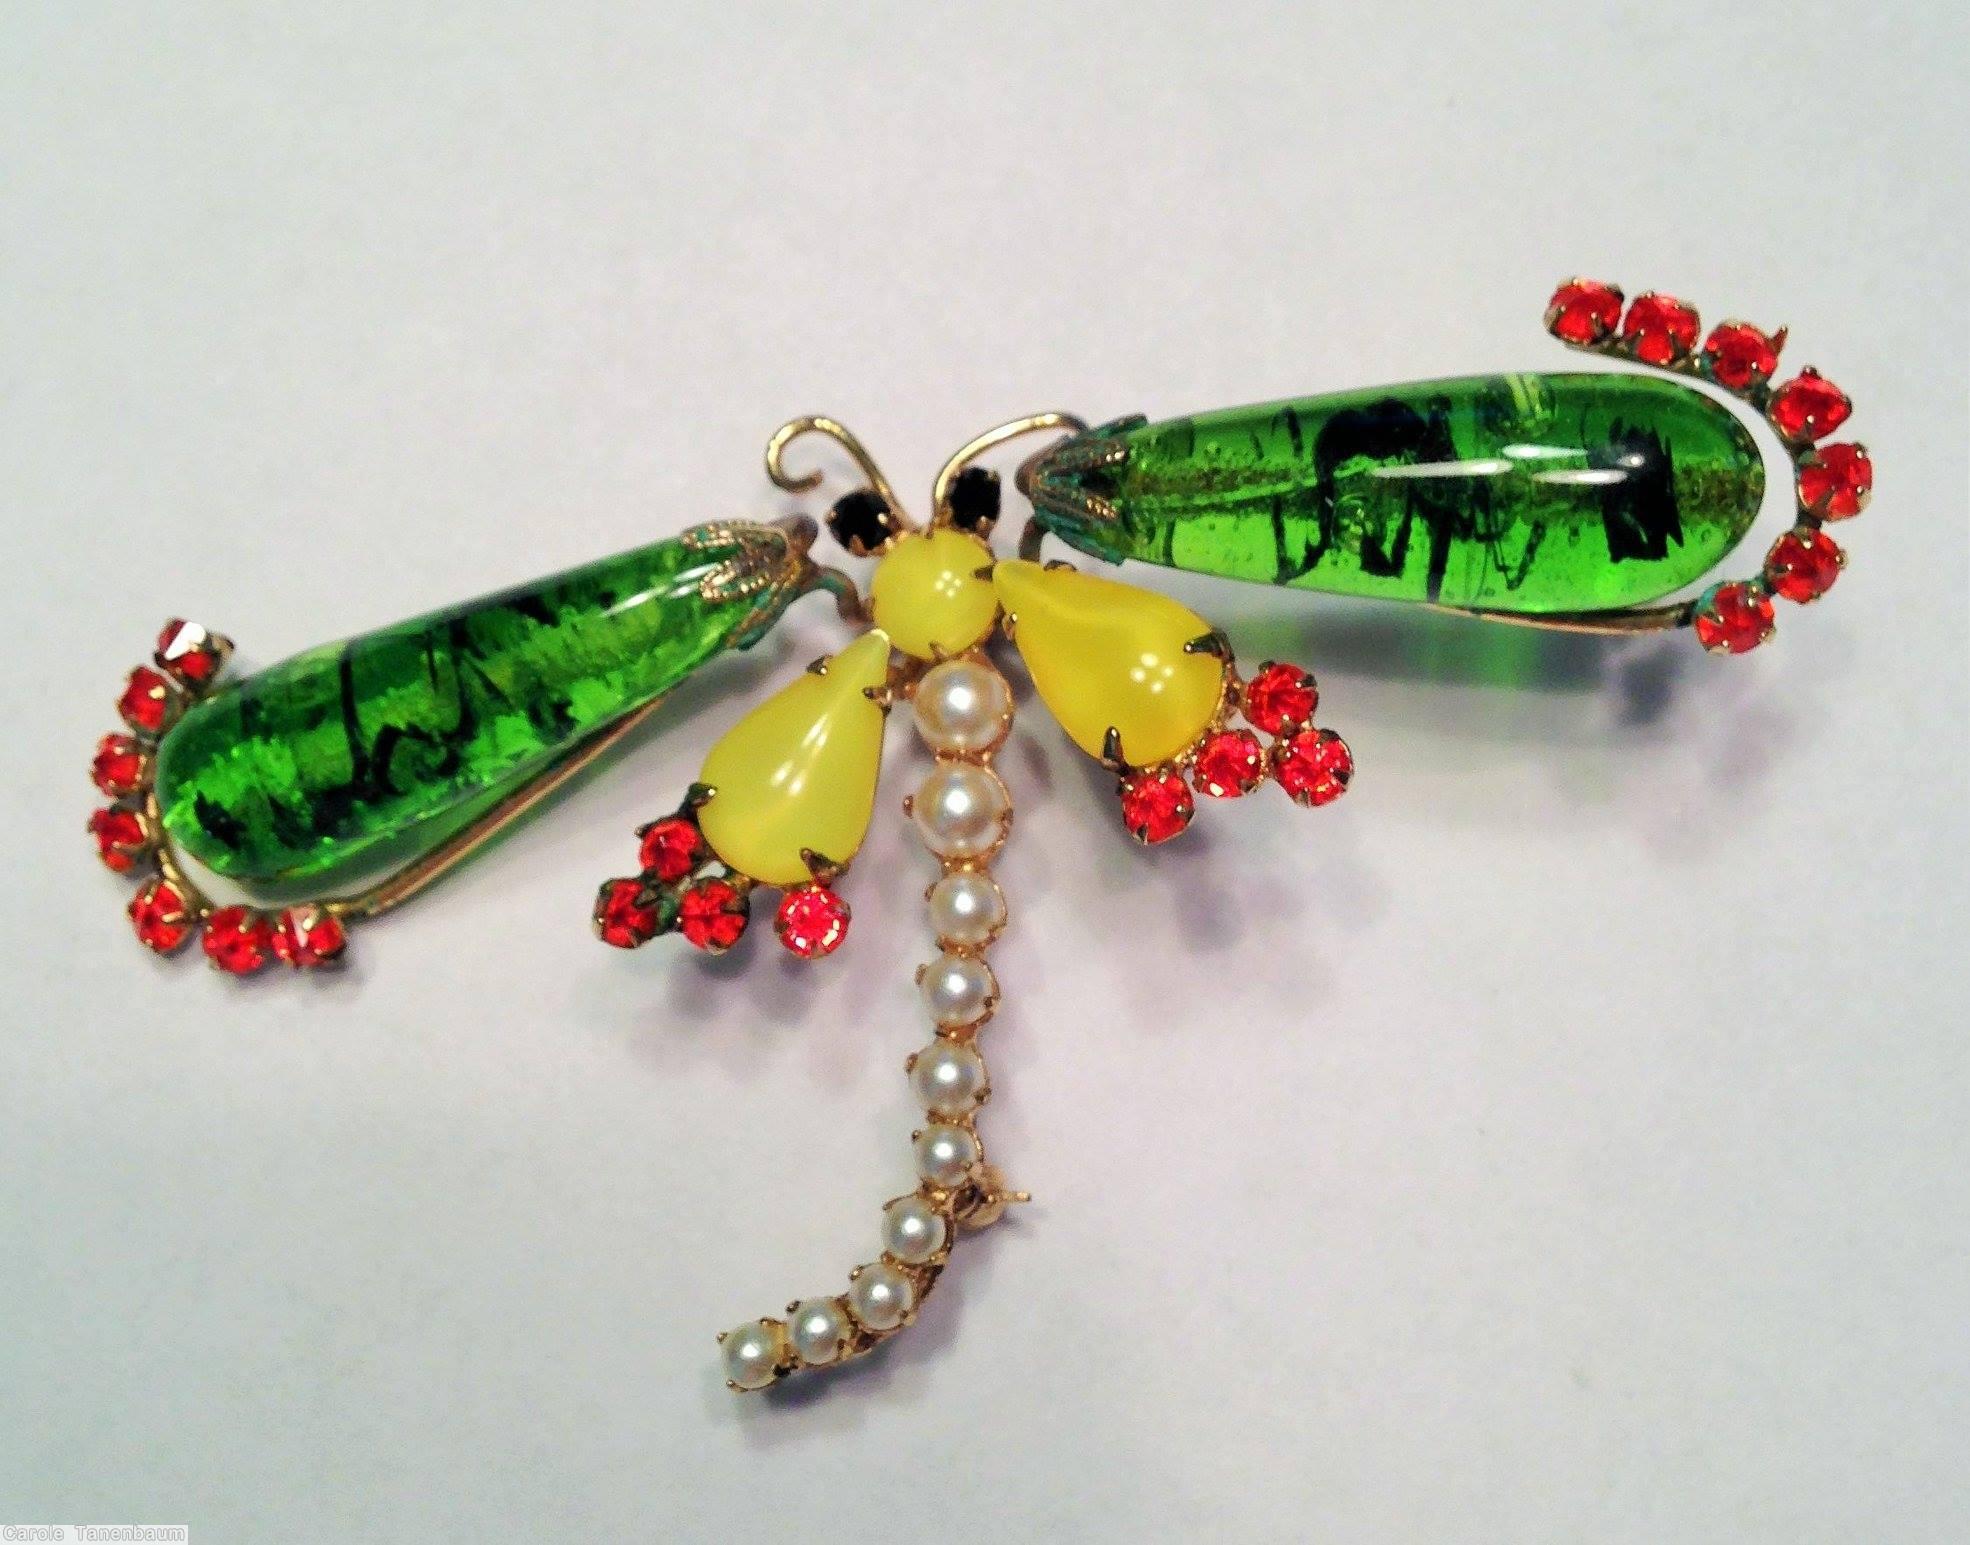 Schreiner elongated teardrop wing dragonfly pin 7 small stone in a row 10 chaton body black marbled clear green lime coral faux pearl seeds jet jewelry